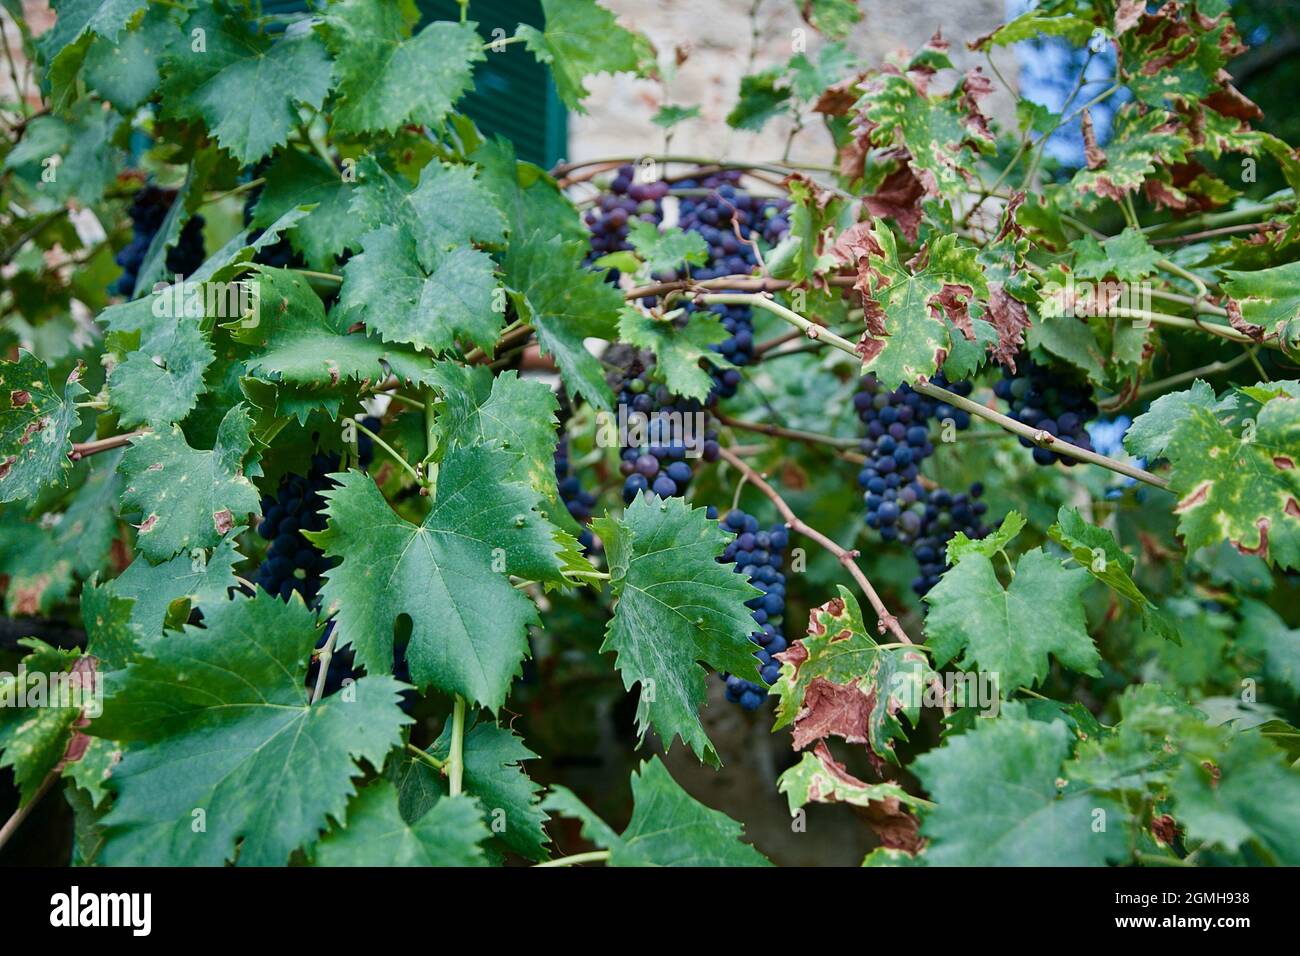 bunches of grapes with their green leaves Stock Photo